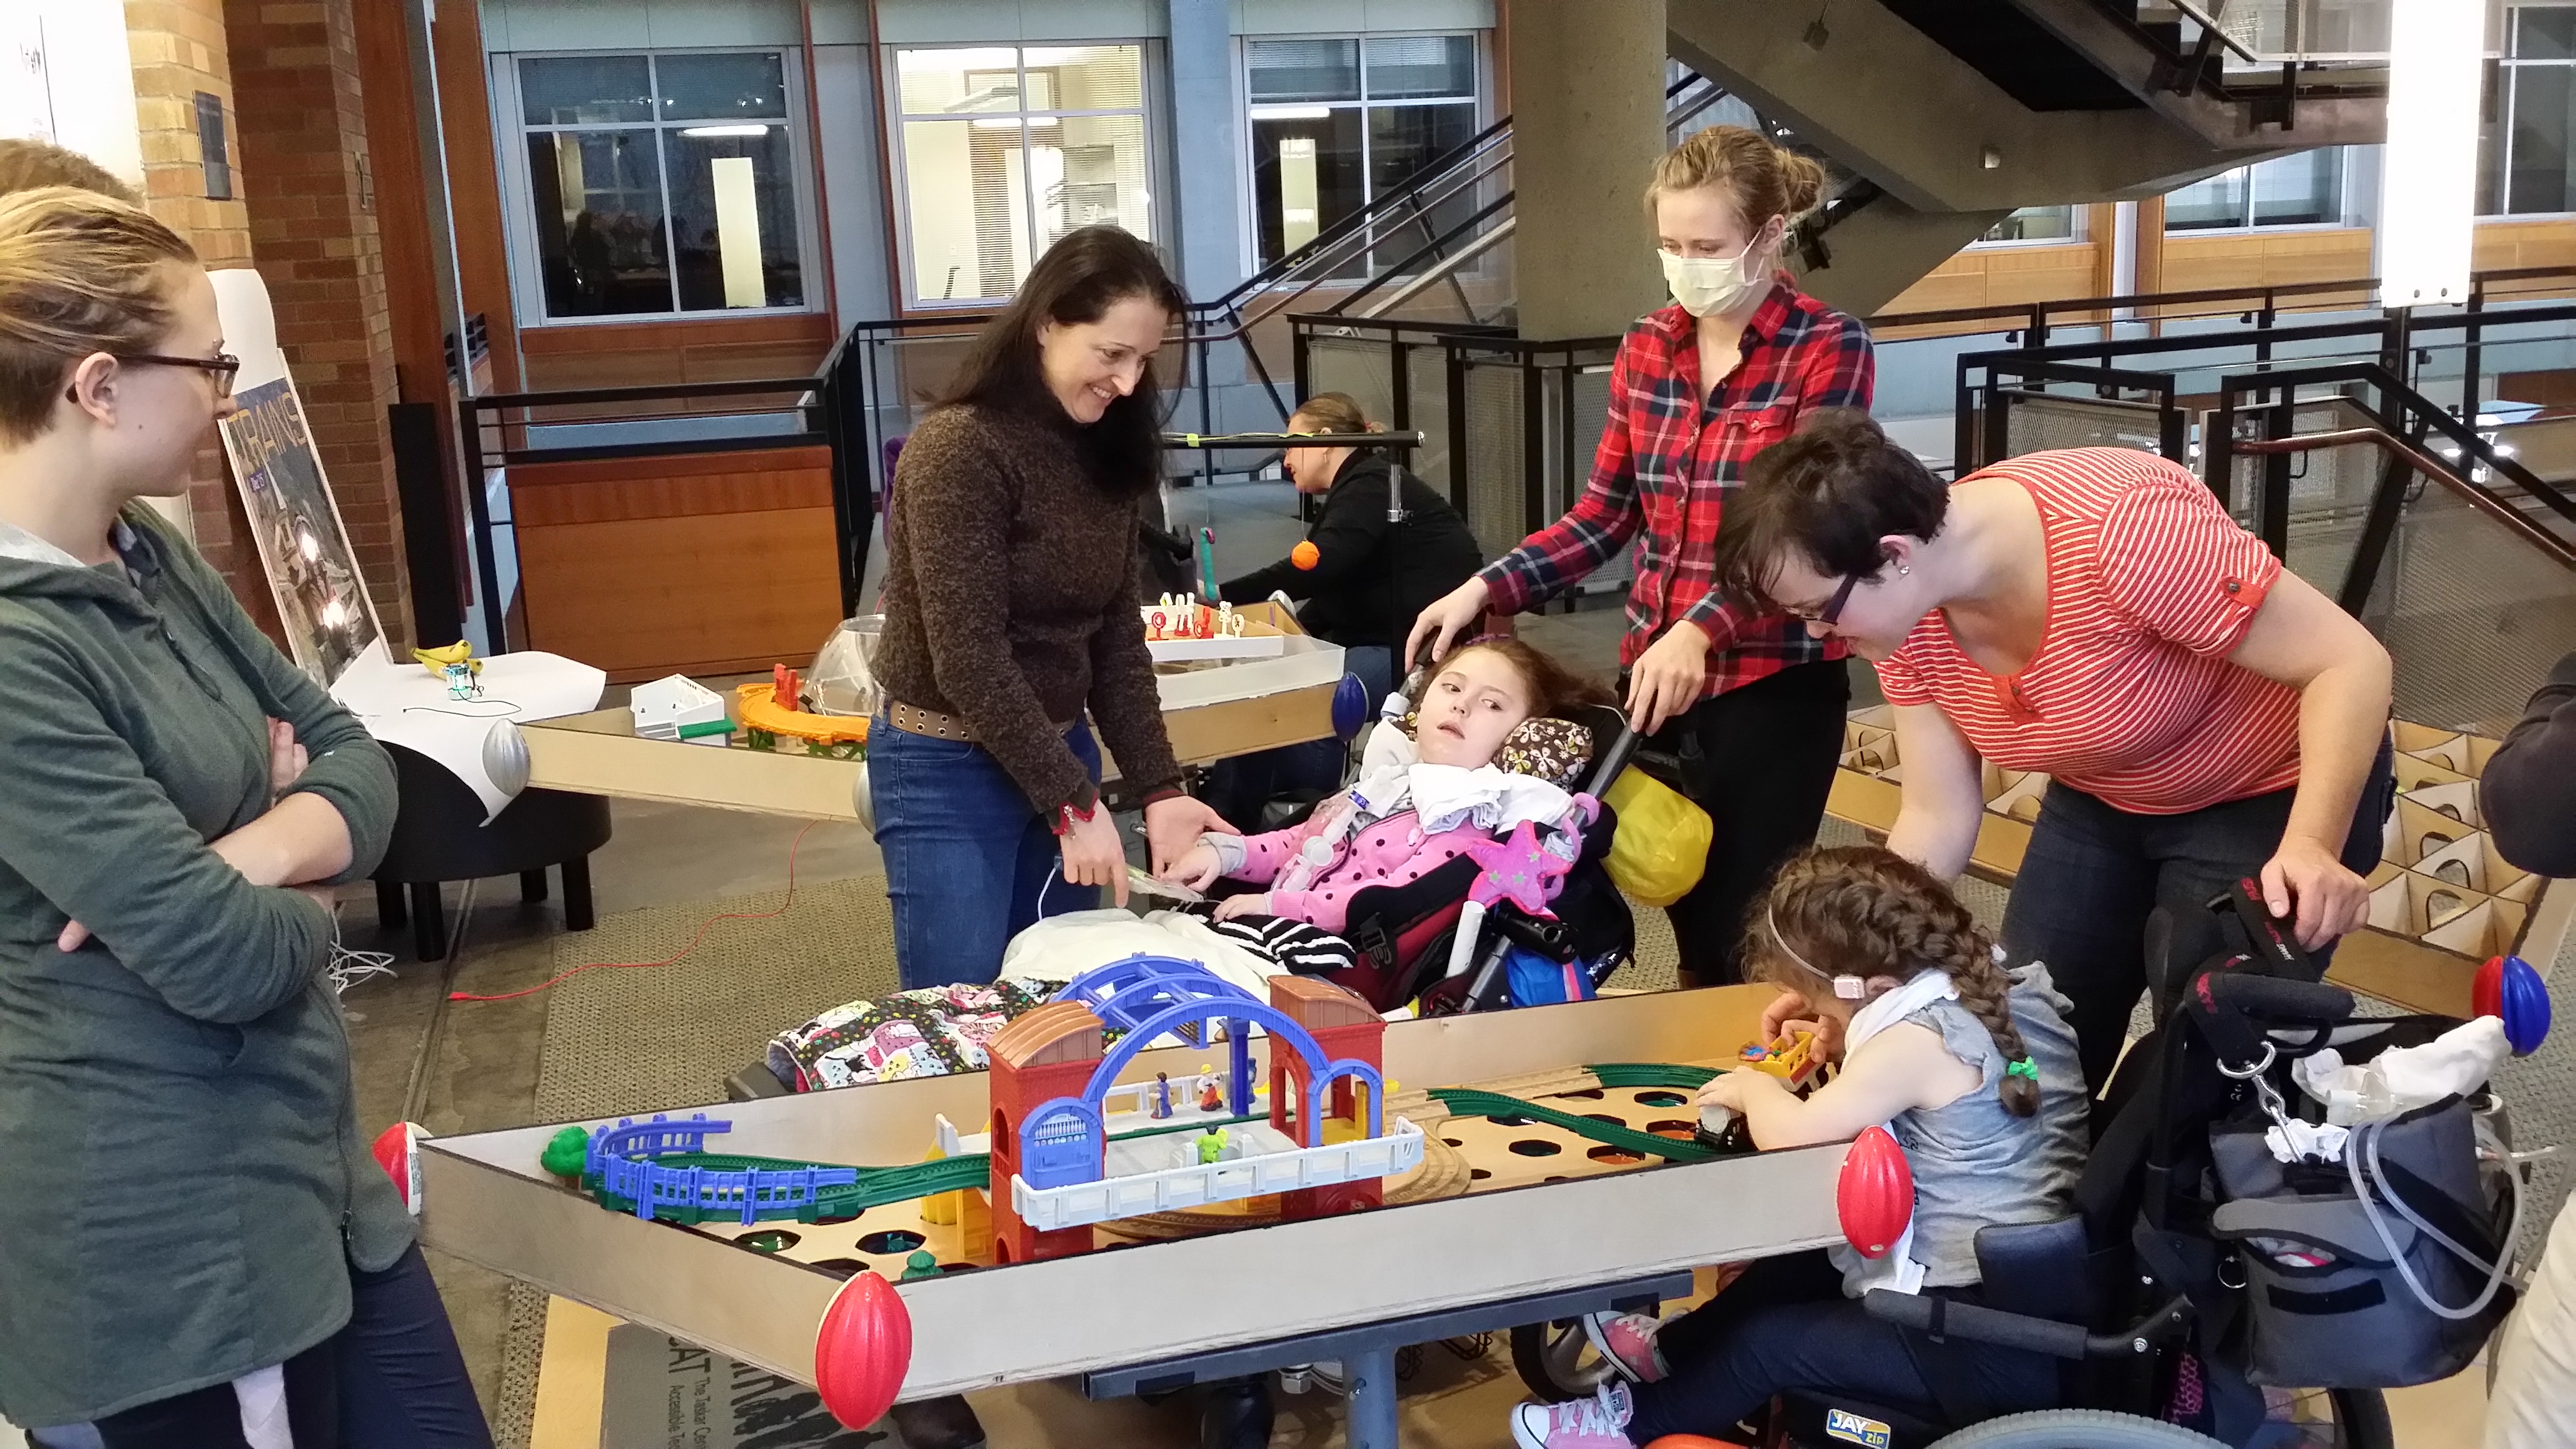 Play Group theme was "trains" in December 2016.